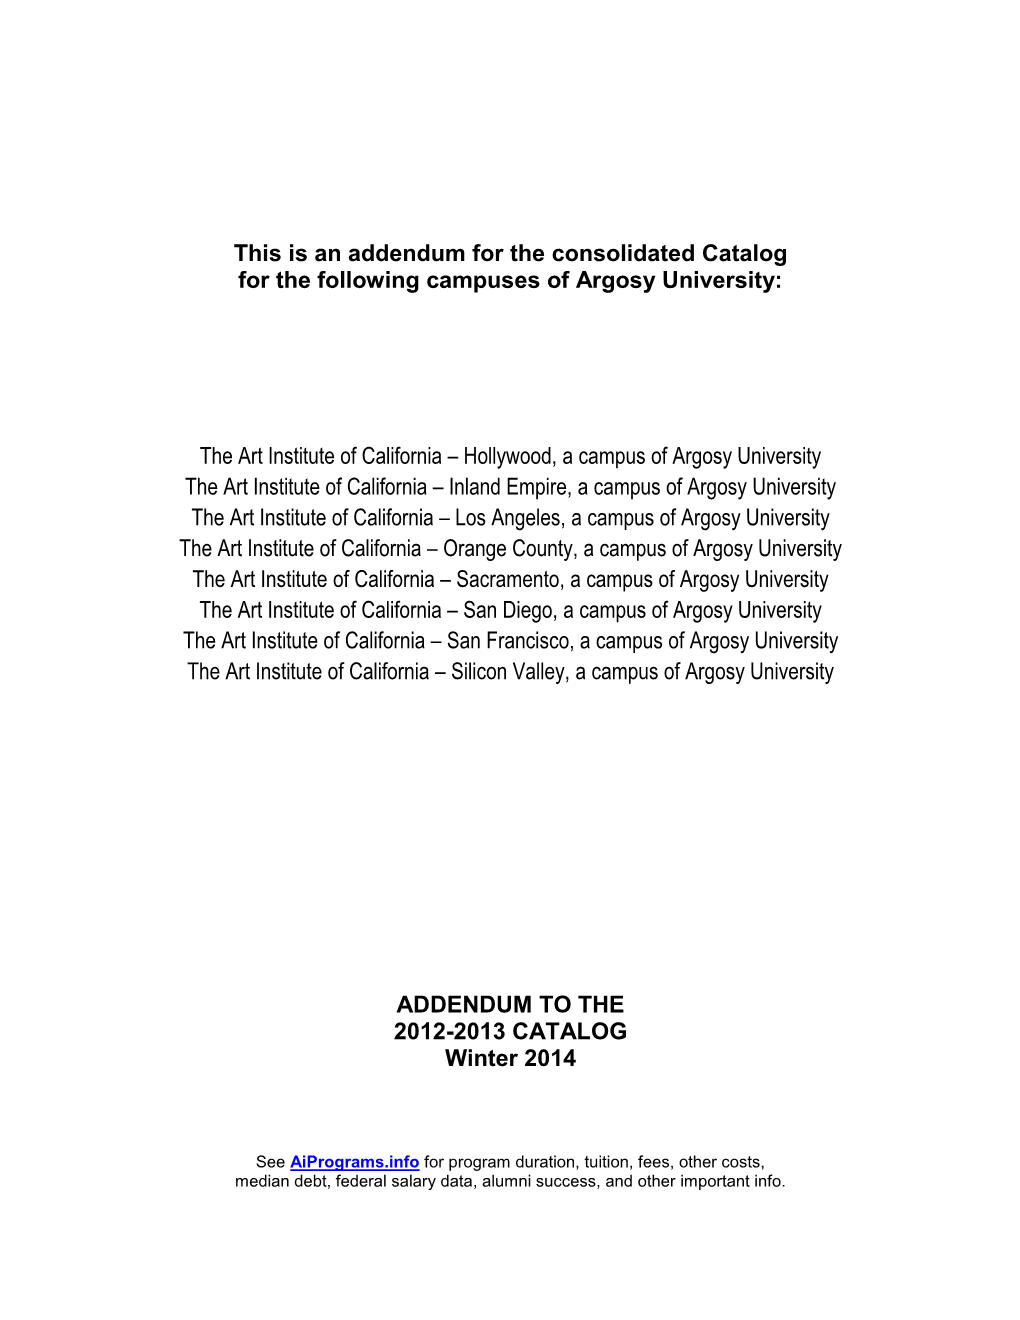 This Is an Addendum for the Consolidated Catalog for the Following Campuses of Argosy University: the Art Institute of Californ